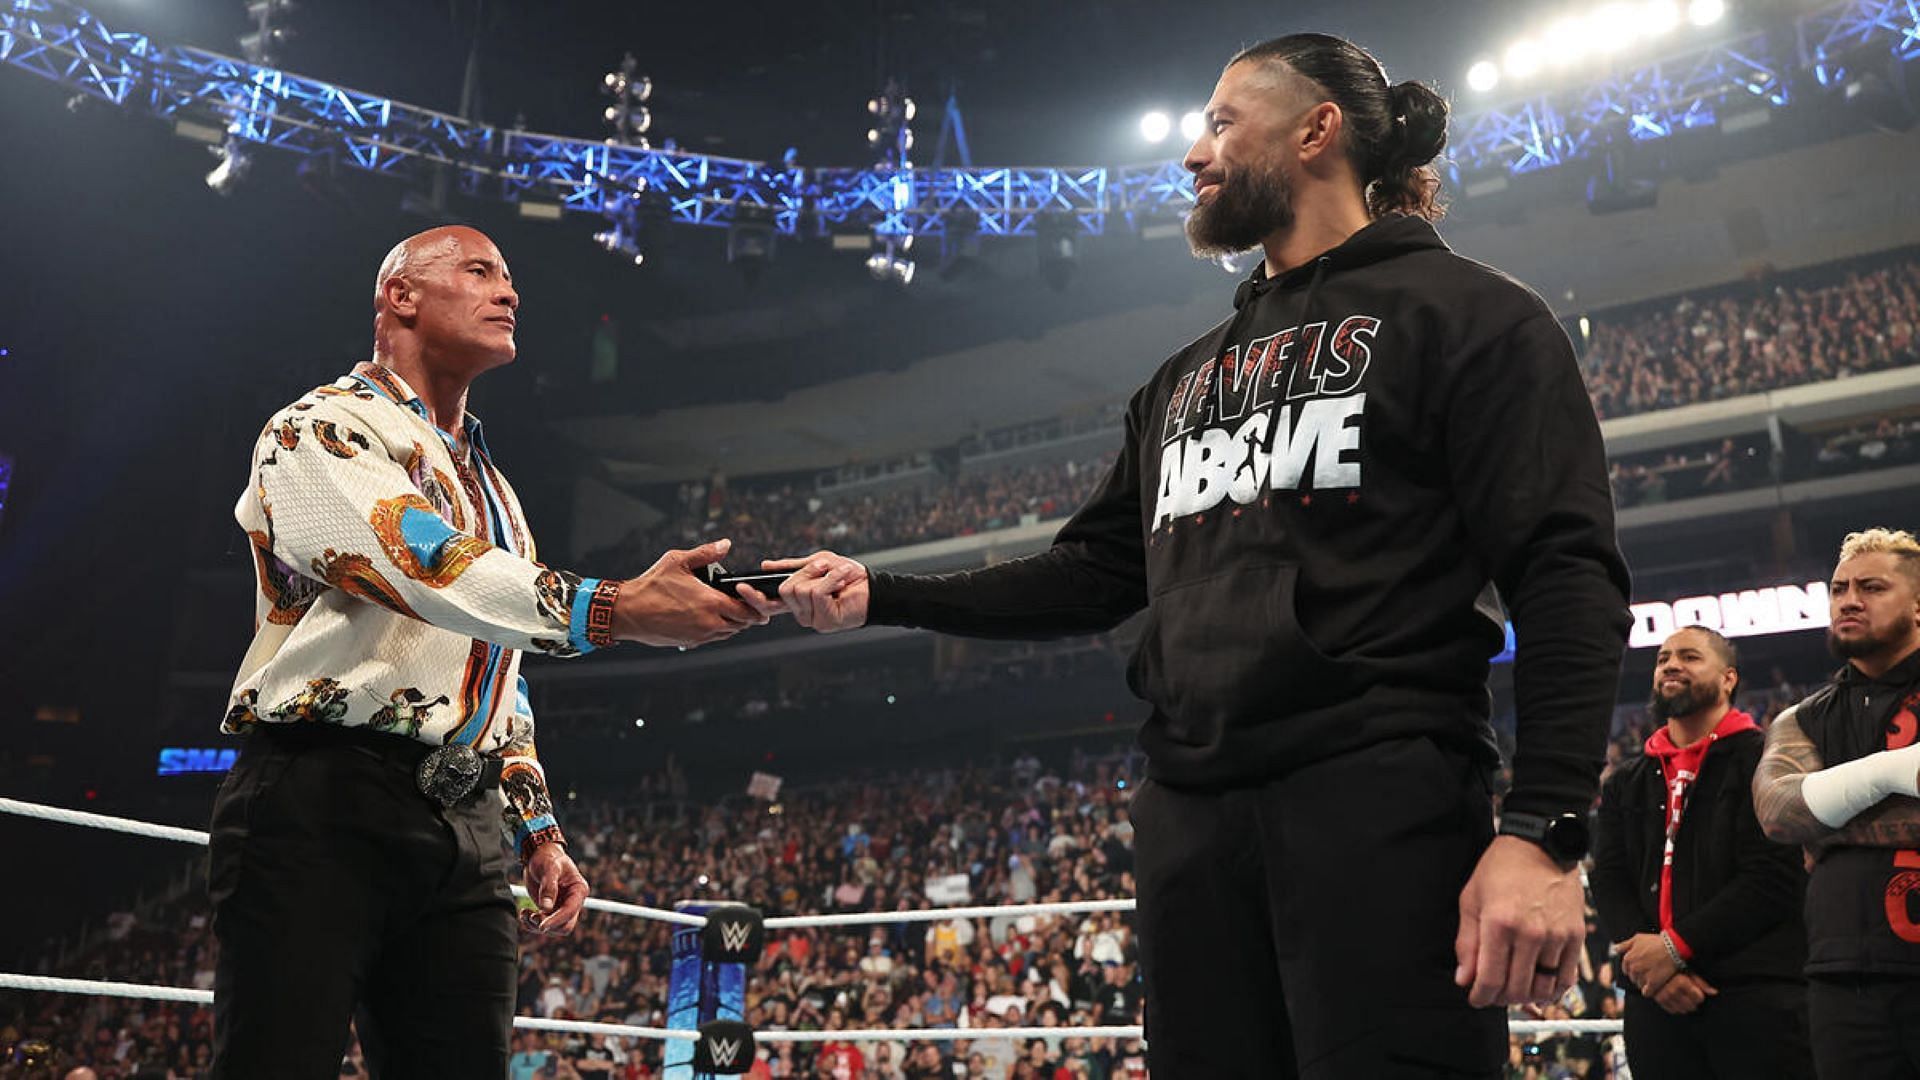 How long with The Rock and Roman Reigns be able to co-exist?